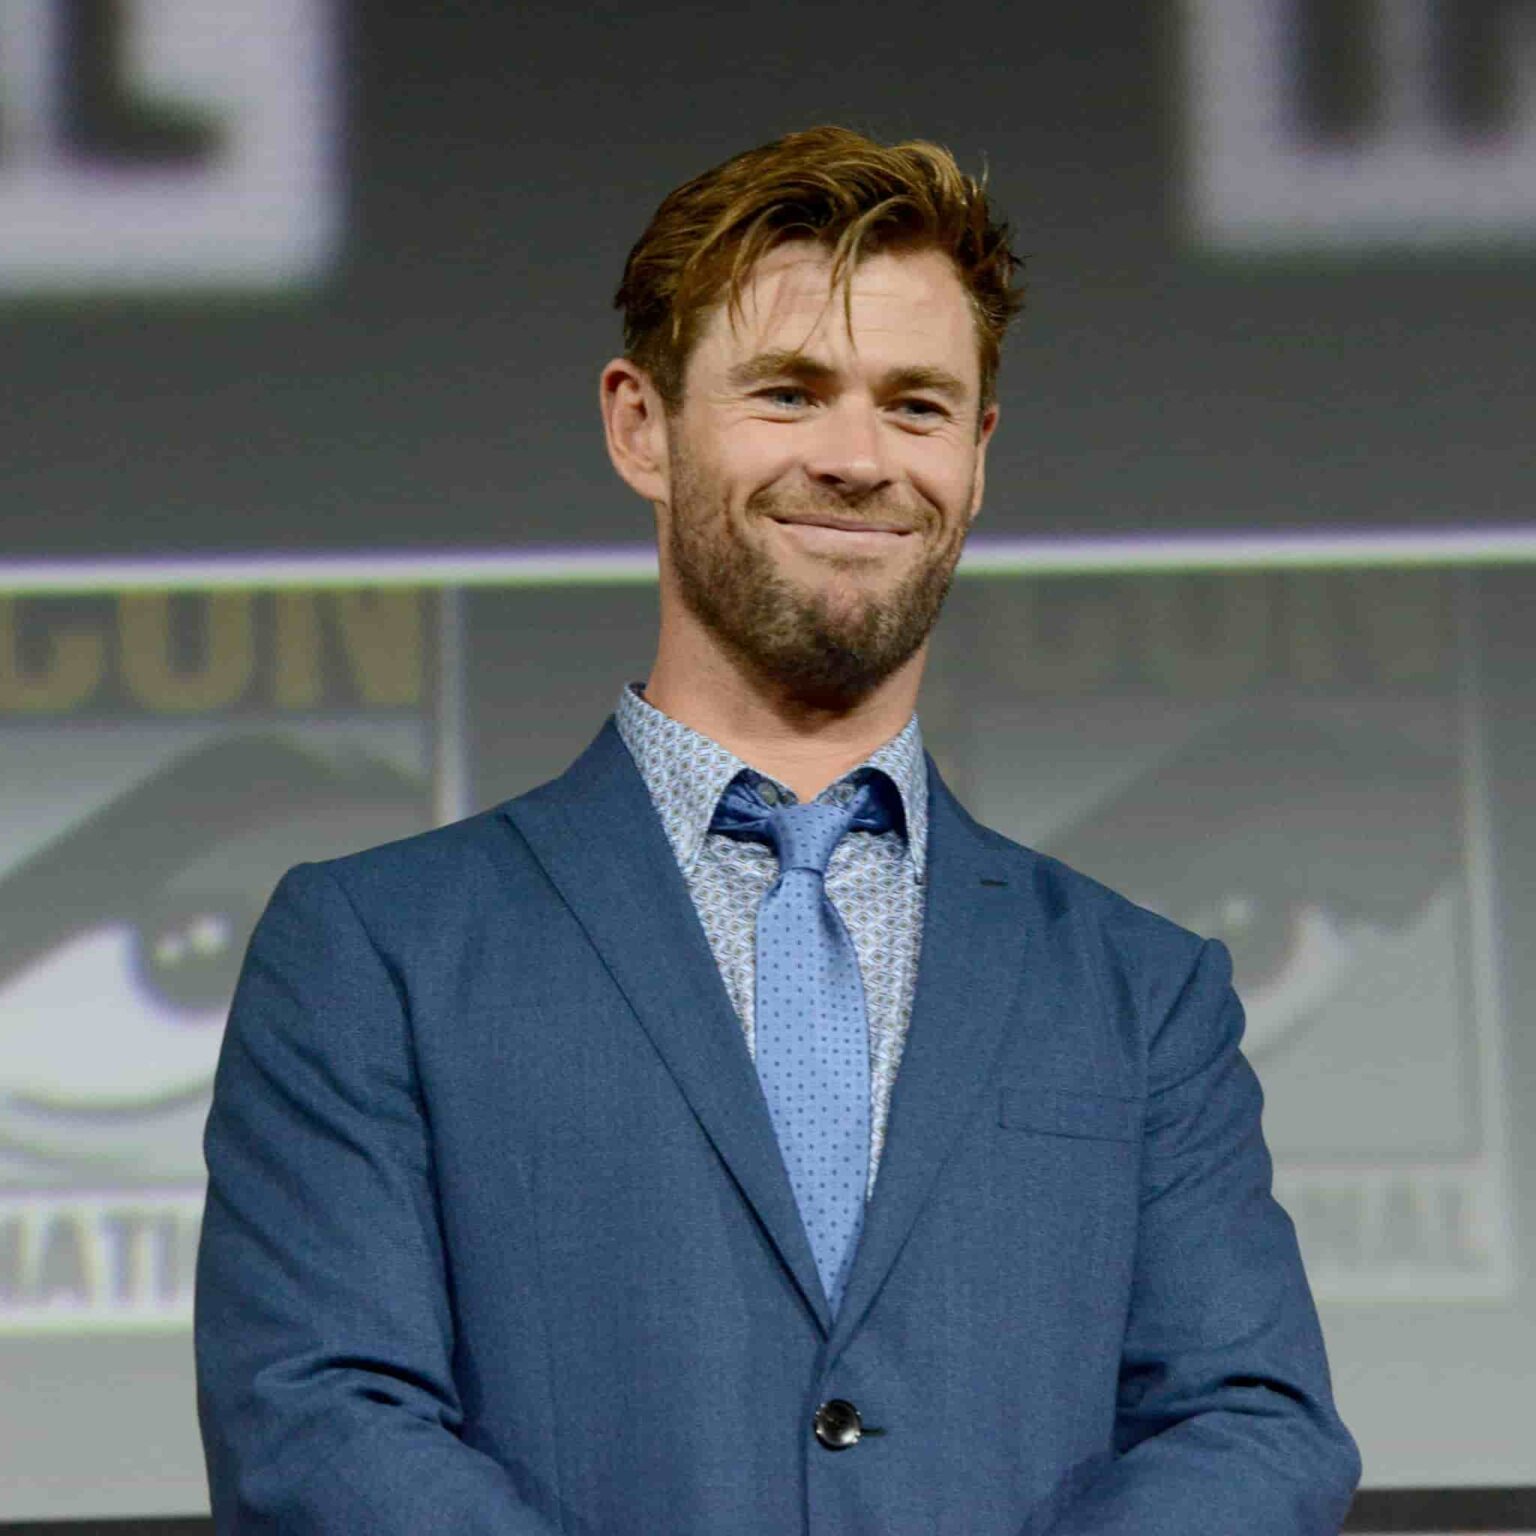 Chris Hemsworth Net Worth News from All Over the World